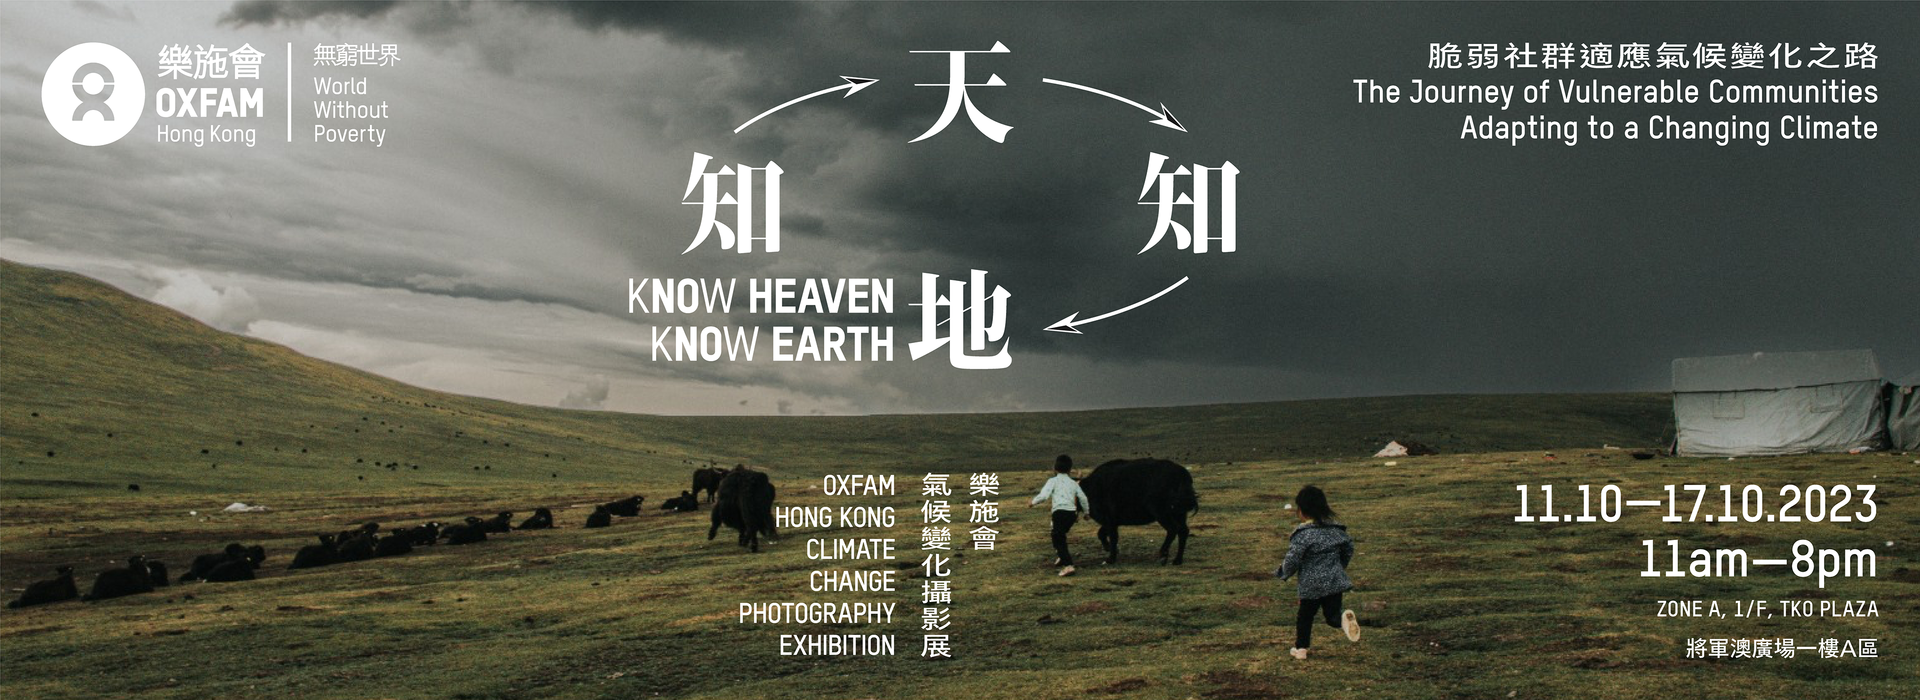 Know Heaven, Know Earth: Oxfam Hong Kong Climate Change Photography Exhibition